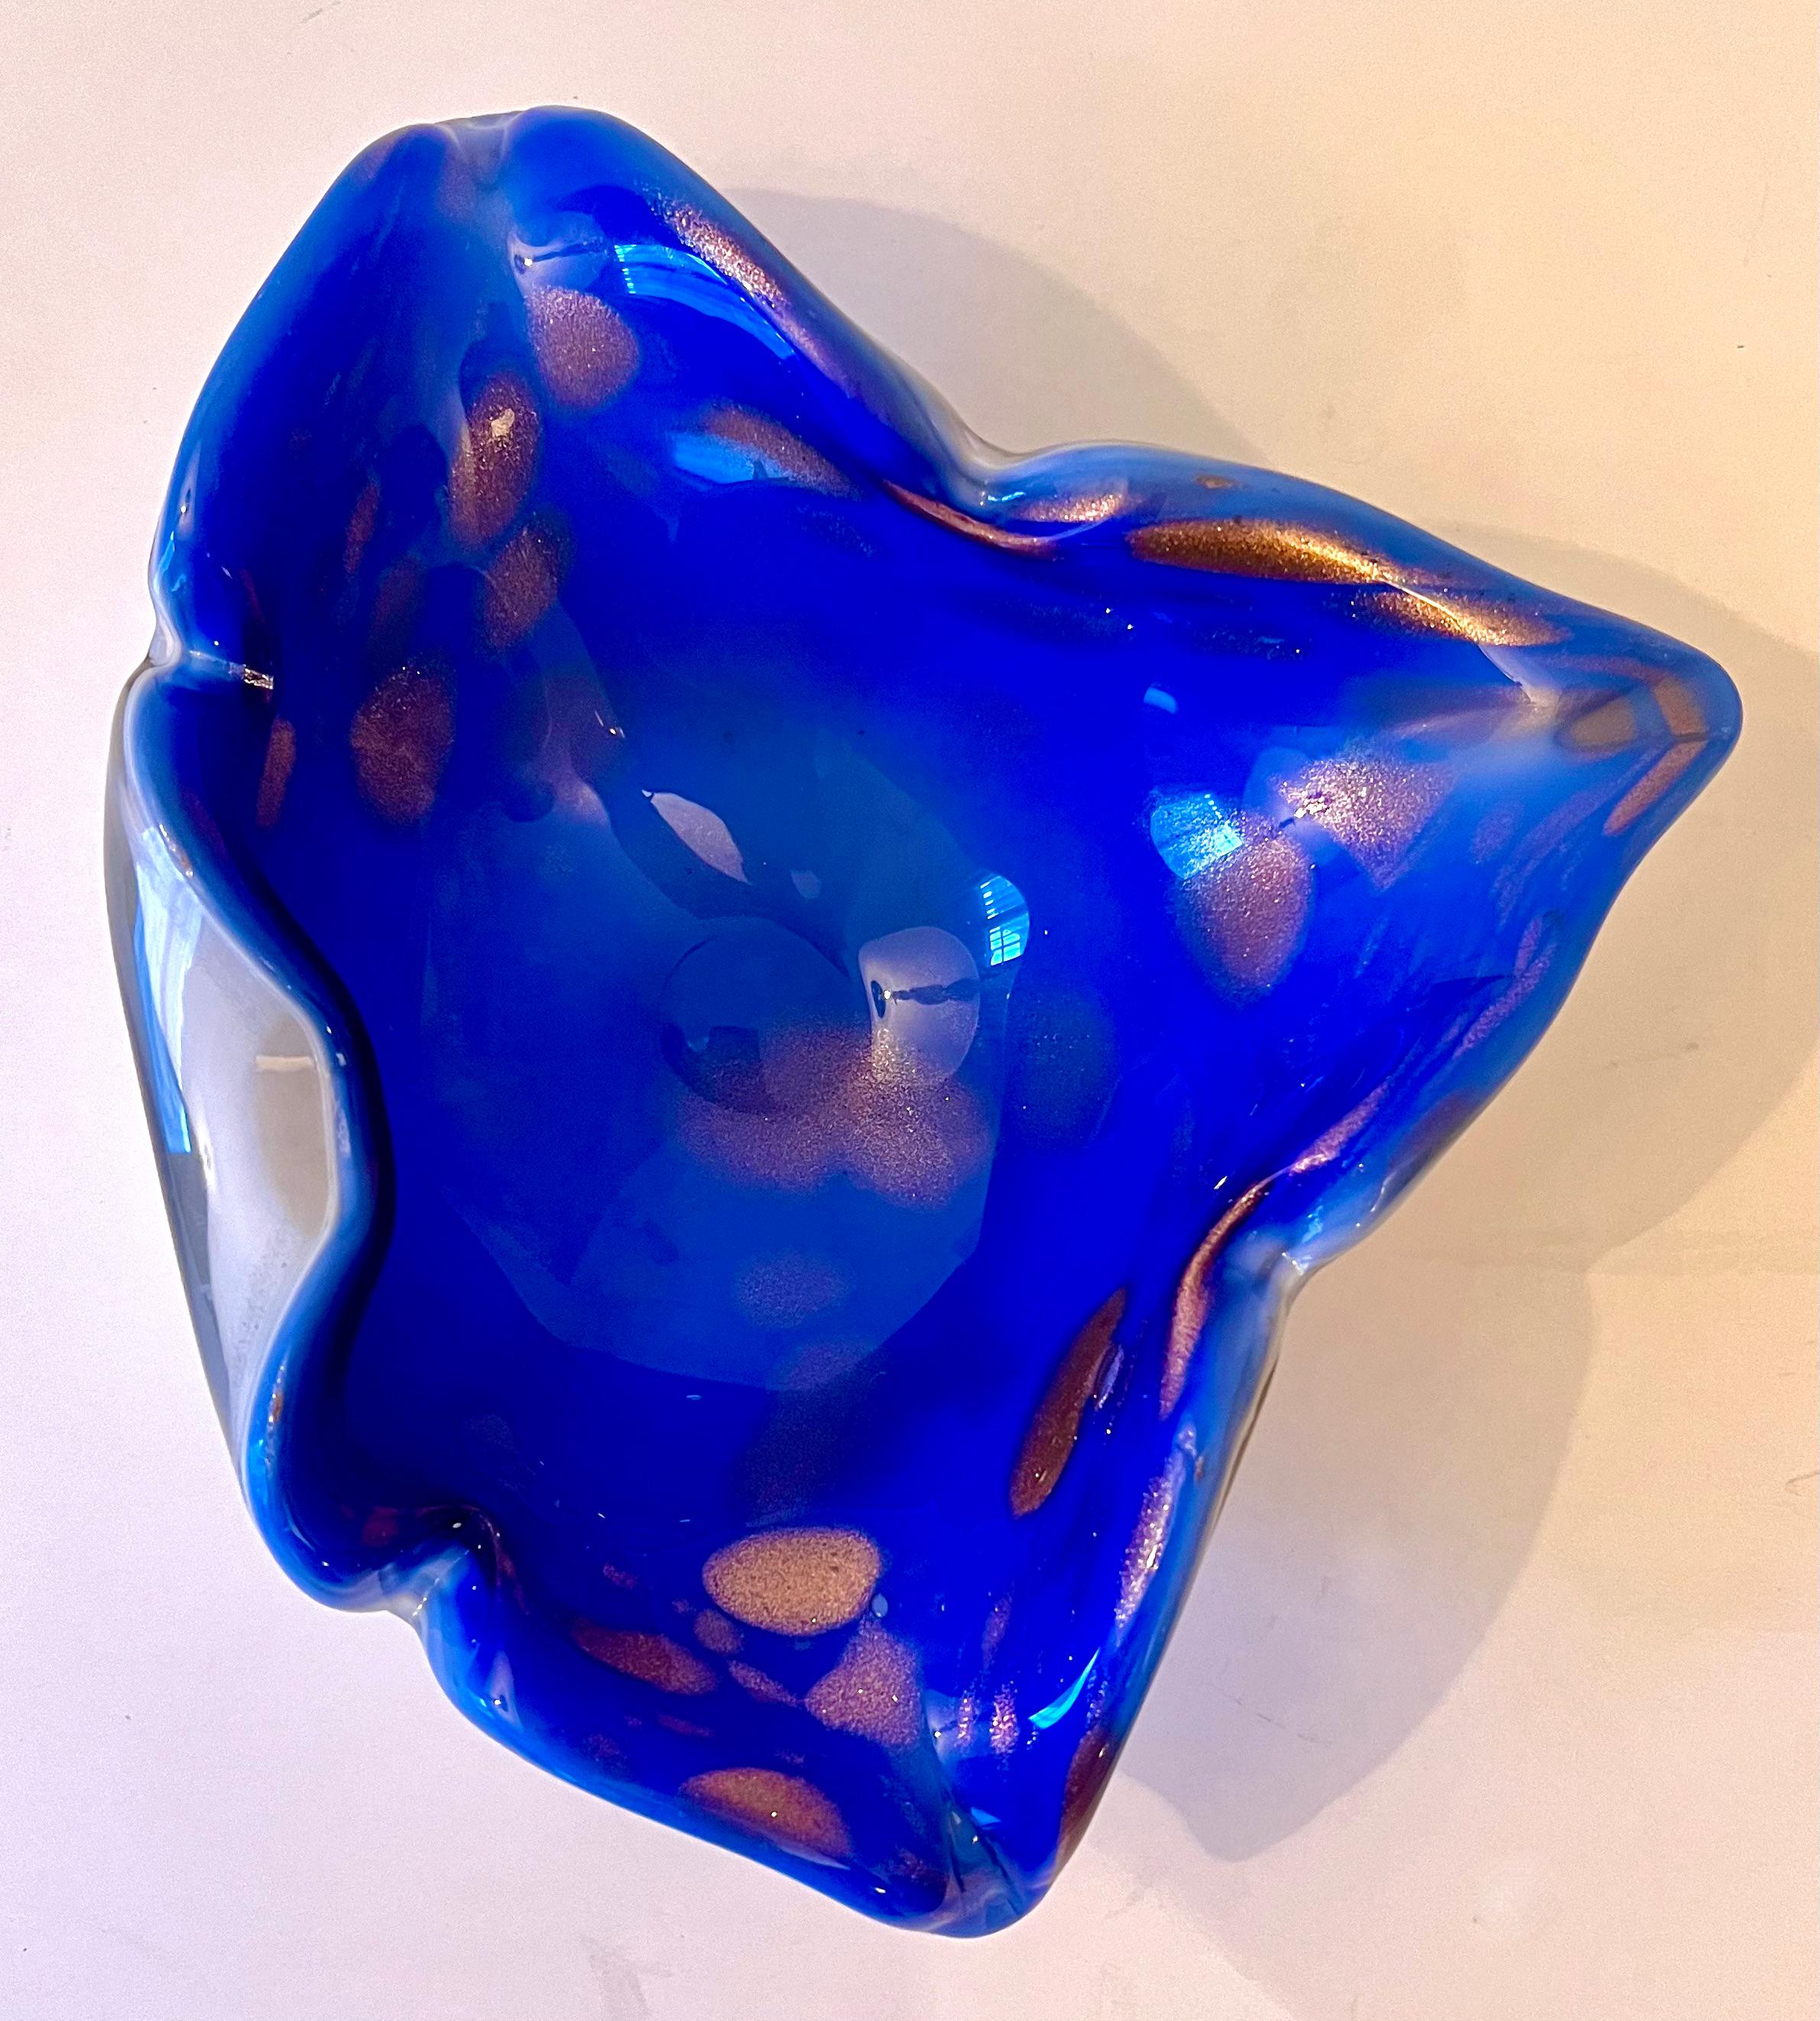 A wonderful Sommerso Murano bowl or ashtray of brilliant cobalt Blue - hand crafted in Italy and ready for your cocktail table or works well as a decorative piece... also makes a great addition to your desk for things like rubber bands to paper